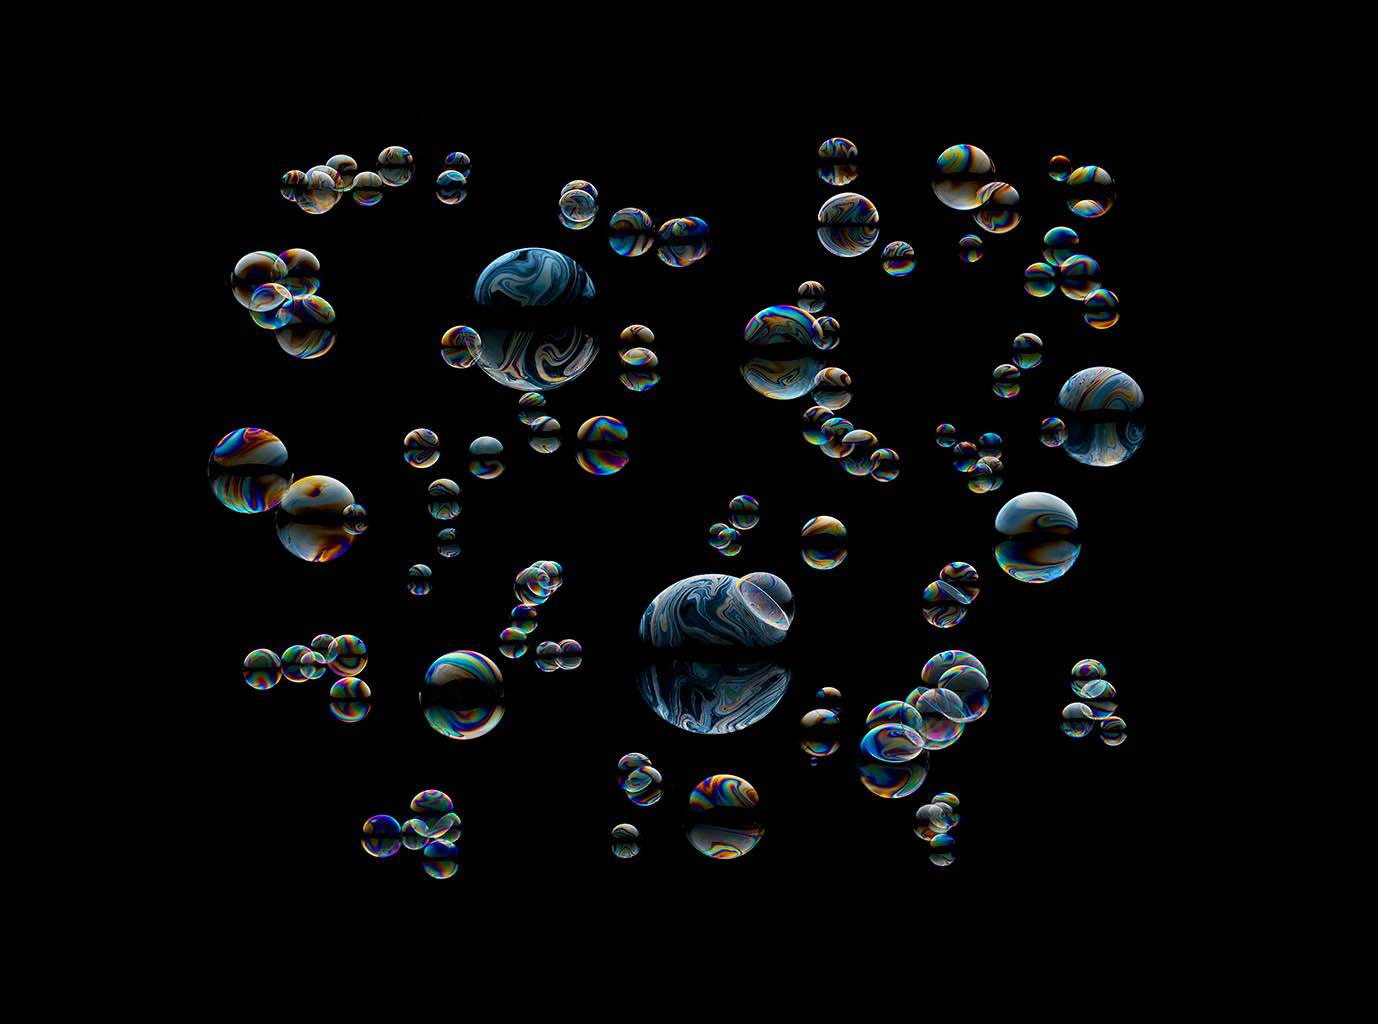 Liquid / Smoke Photography of Bubbles by Packshot Factory